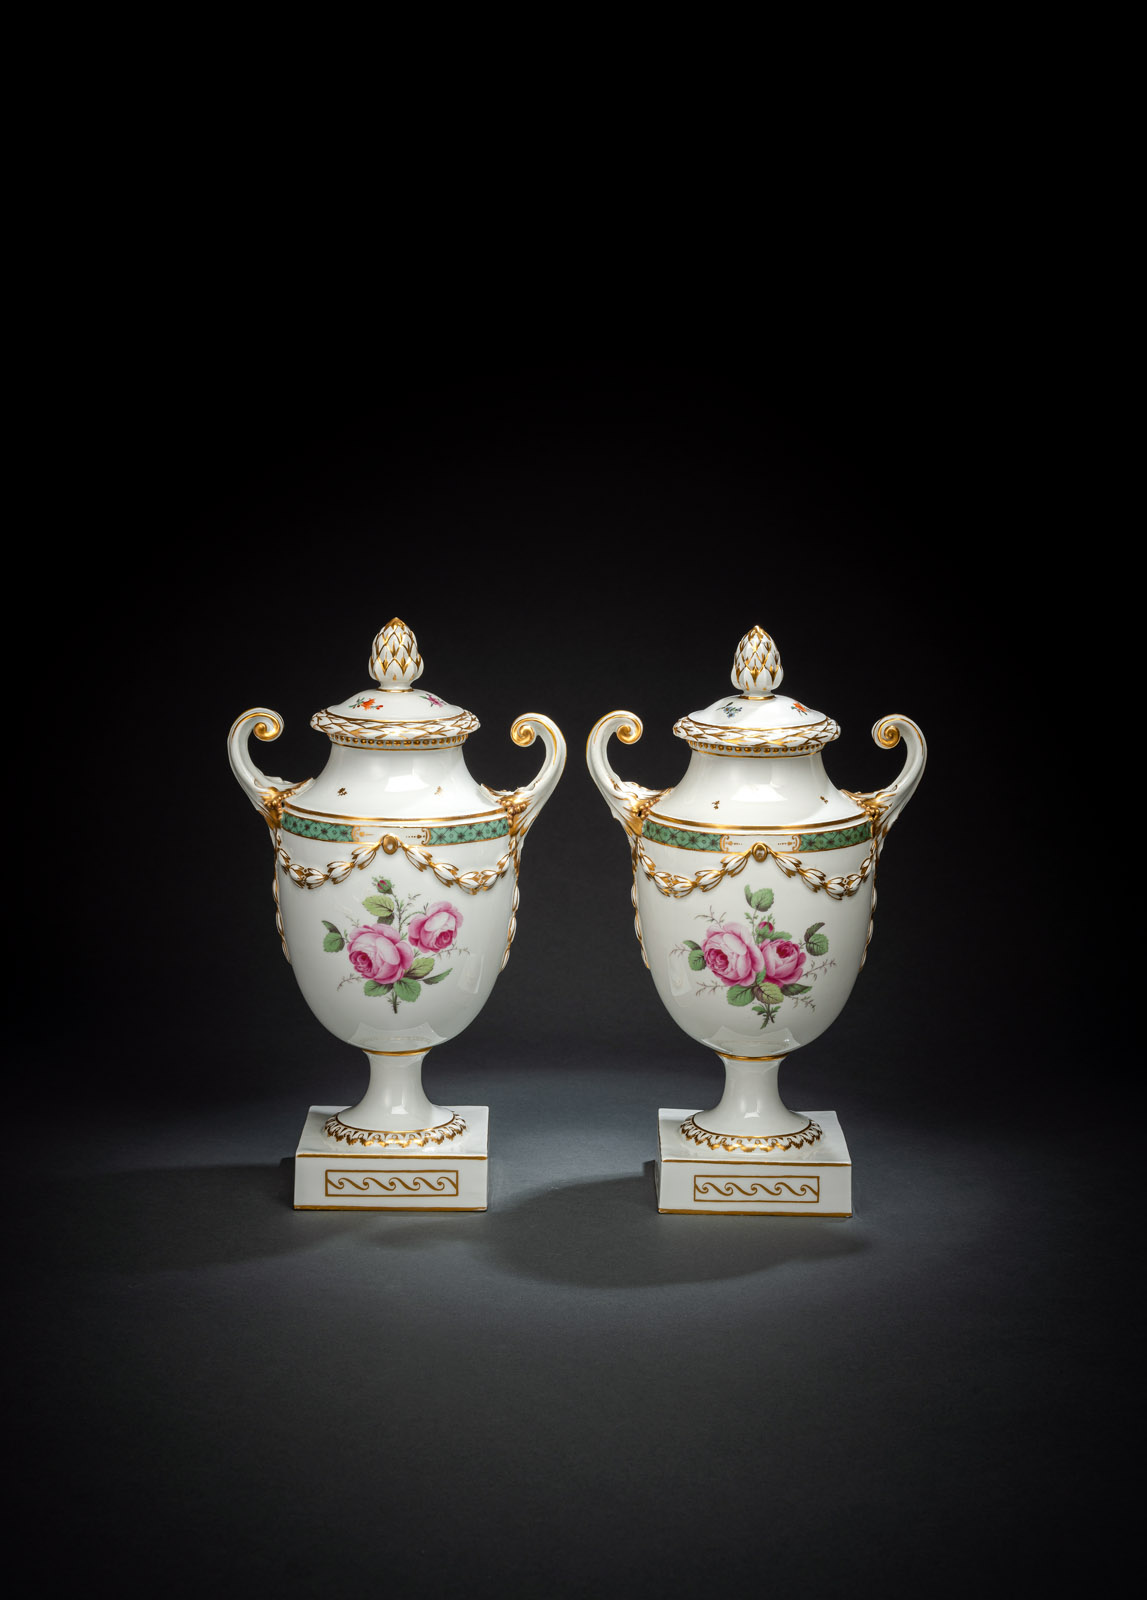 A PAIR OF FLORAL PATTERN VASES AND COVERS